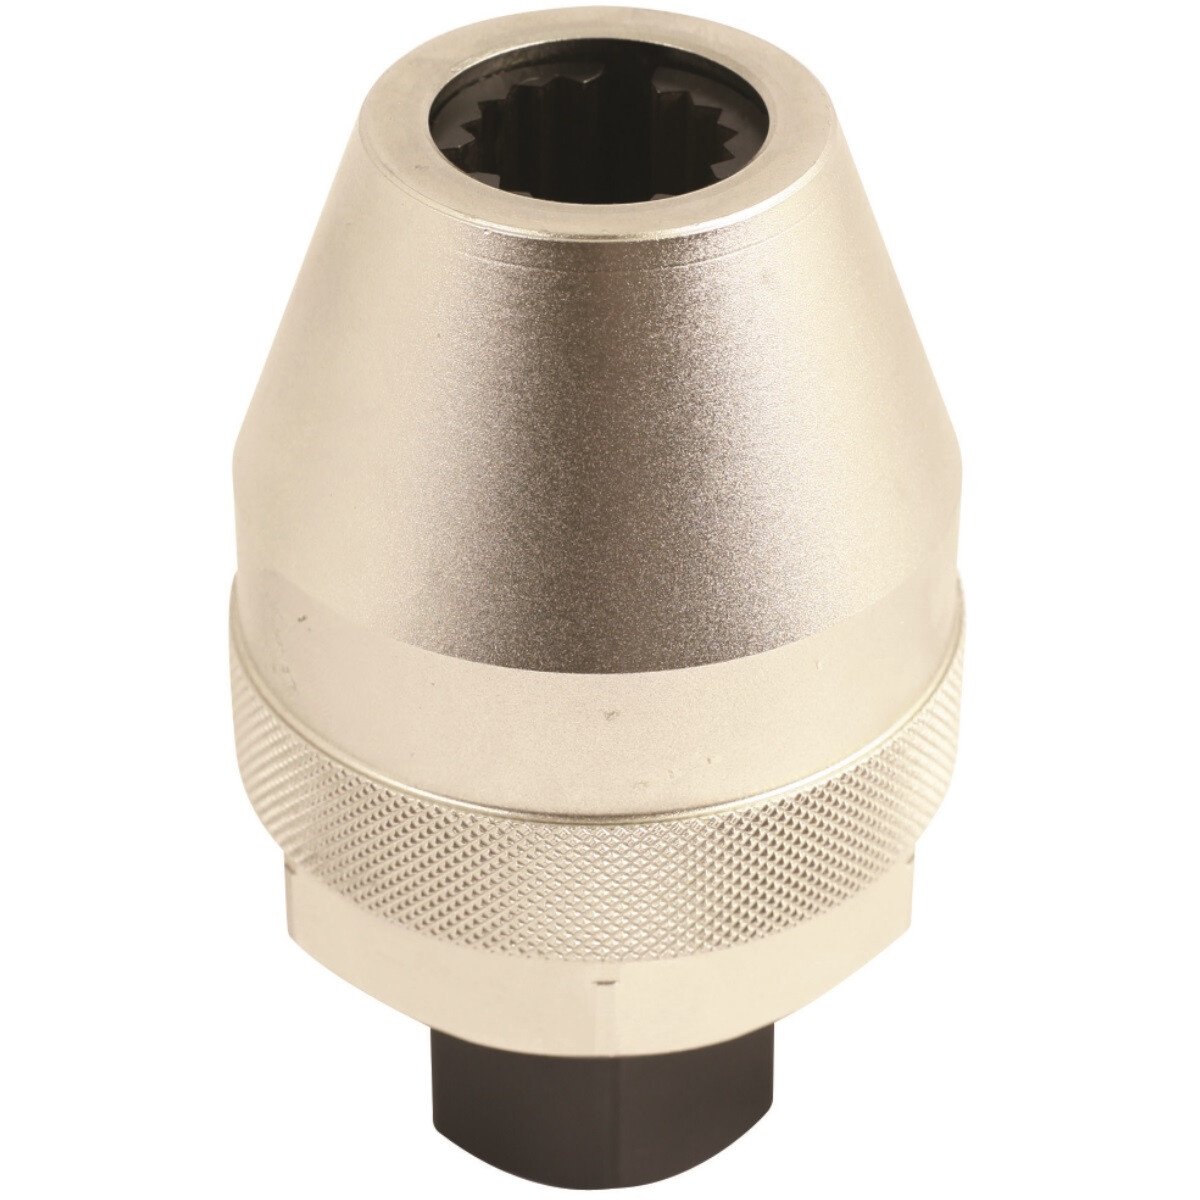 Laser 4894 Large Stud Extractor 19-25mm 1/2" Drive